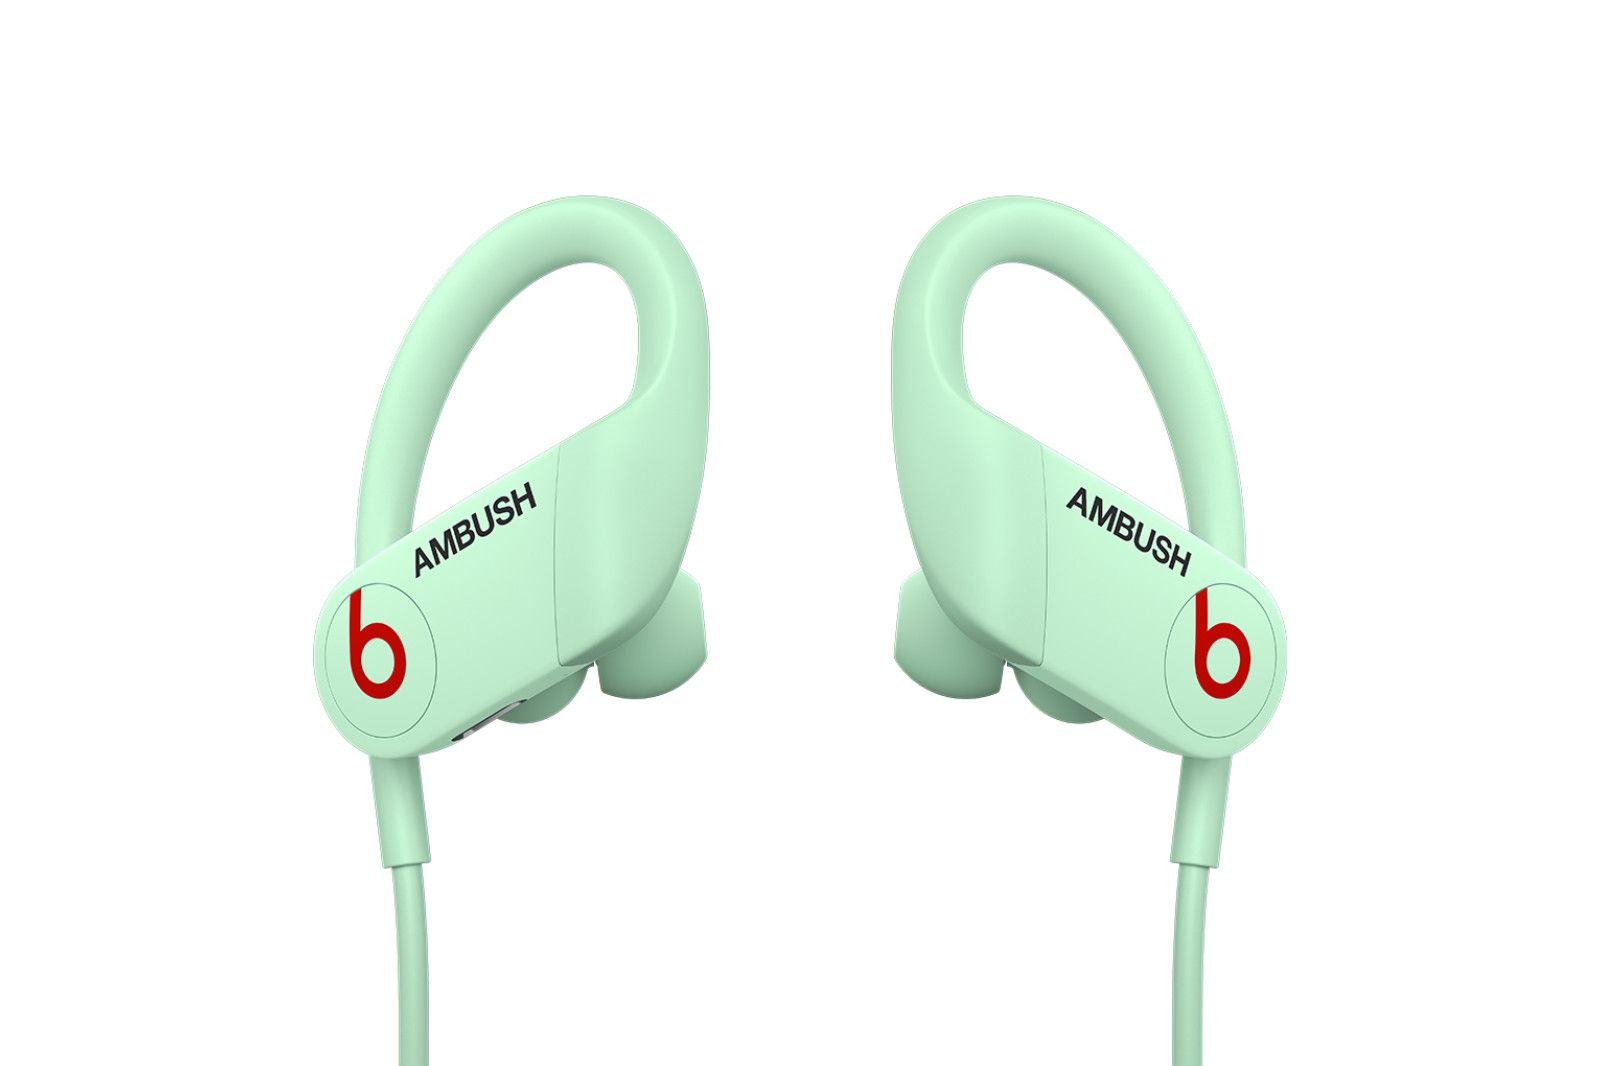 Beats launches glow-in-the-dark Powerbeats in collaboration with fashion brand, Ambush photo 3